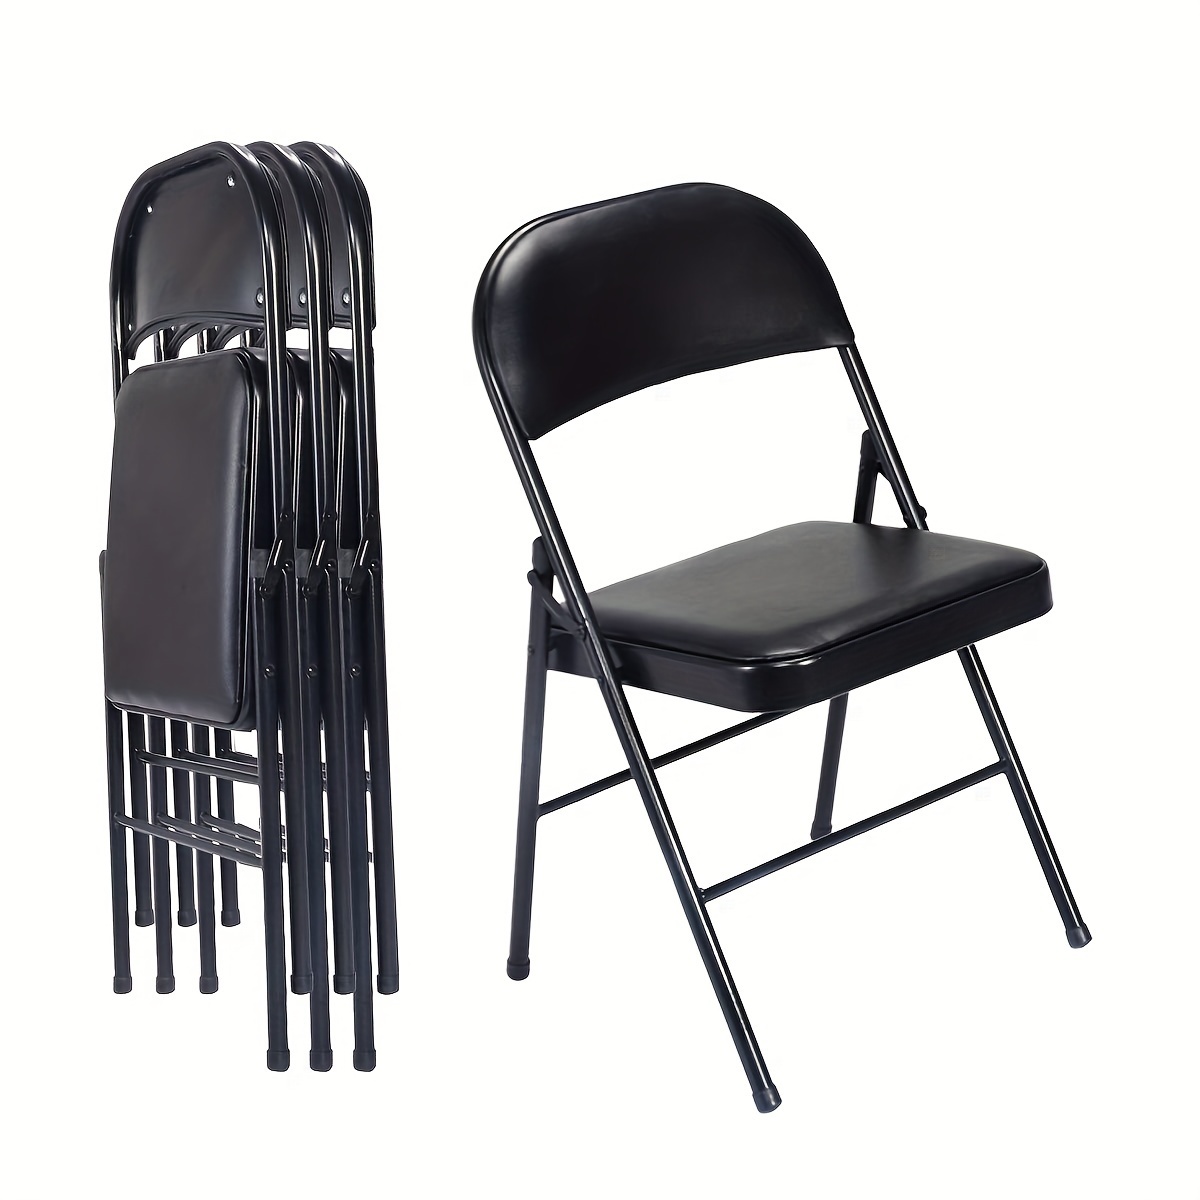 

12pack Folding Chairs, Padded Folding Chairs With Upholstered Seat, Handle Hole, No-assembly Space Saving, Folding Chairs With Padded Seats For Conference Room, Office, School, Church, Wedding Party